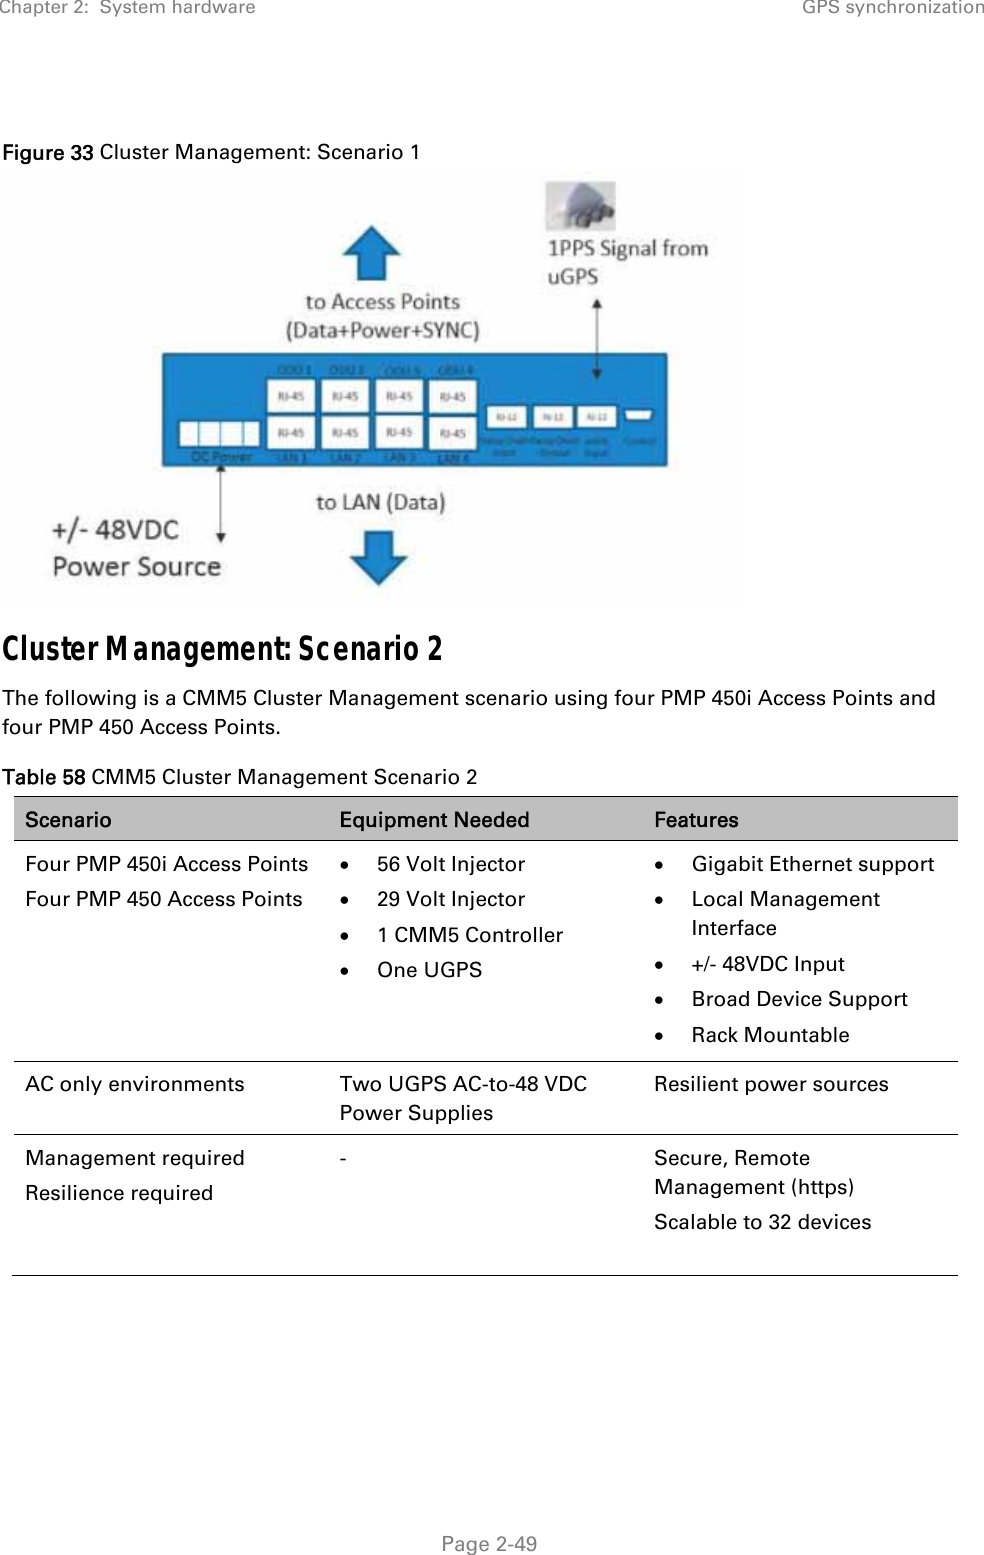 Chapter 2:  System hardware GPS synchronization   Page 2-49  Figure 33 Cluster Management: Scenario 1  Cluster Management: Scenario 2 The following is a CMM5 Cluster Management scenario using four PMP 450i Access Points and four PMP 450 Access Points. Table 58 CMM5 Cluster Management Scenario 2 Scenario  Equipment Needed  Features Four PMP 450i Access Points Four PMP 450 Access Points  56 Volt Injector  29 Volt Injector  1 CMM5 Controller  One UGPS  Gigabit Ethernet support  Local Management Interface  +/- 48VDC Input  Broad Device Support  Rack Mountable AC only environments  Two UGPS AC-to-48 VDC Power Supplies Resilient power sources Management required Resilience required - Secure, Remote Management (https) Scalable to 32 devices    